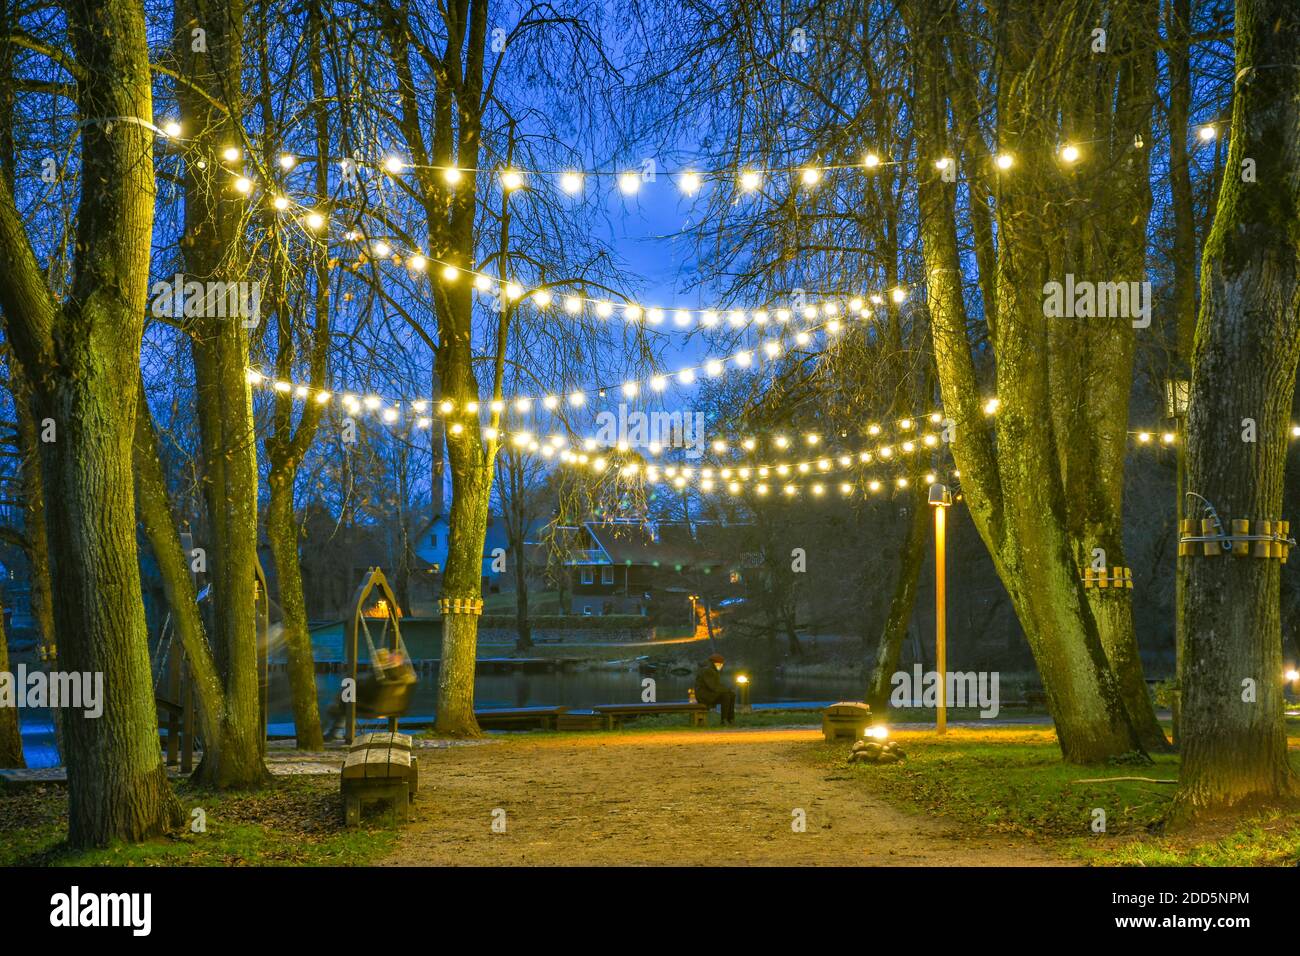 Park or garden with warm light bulbs, street lamps at evening or night, decorative illumination, celebration, cozy Christmas background Stock Photo